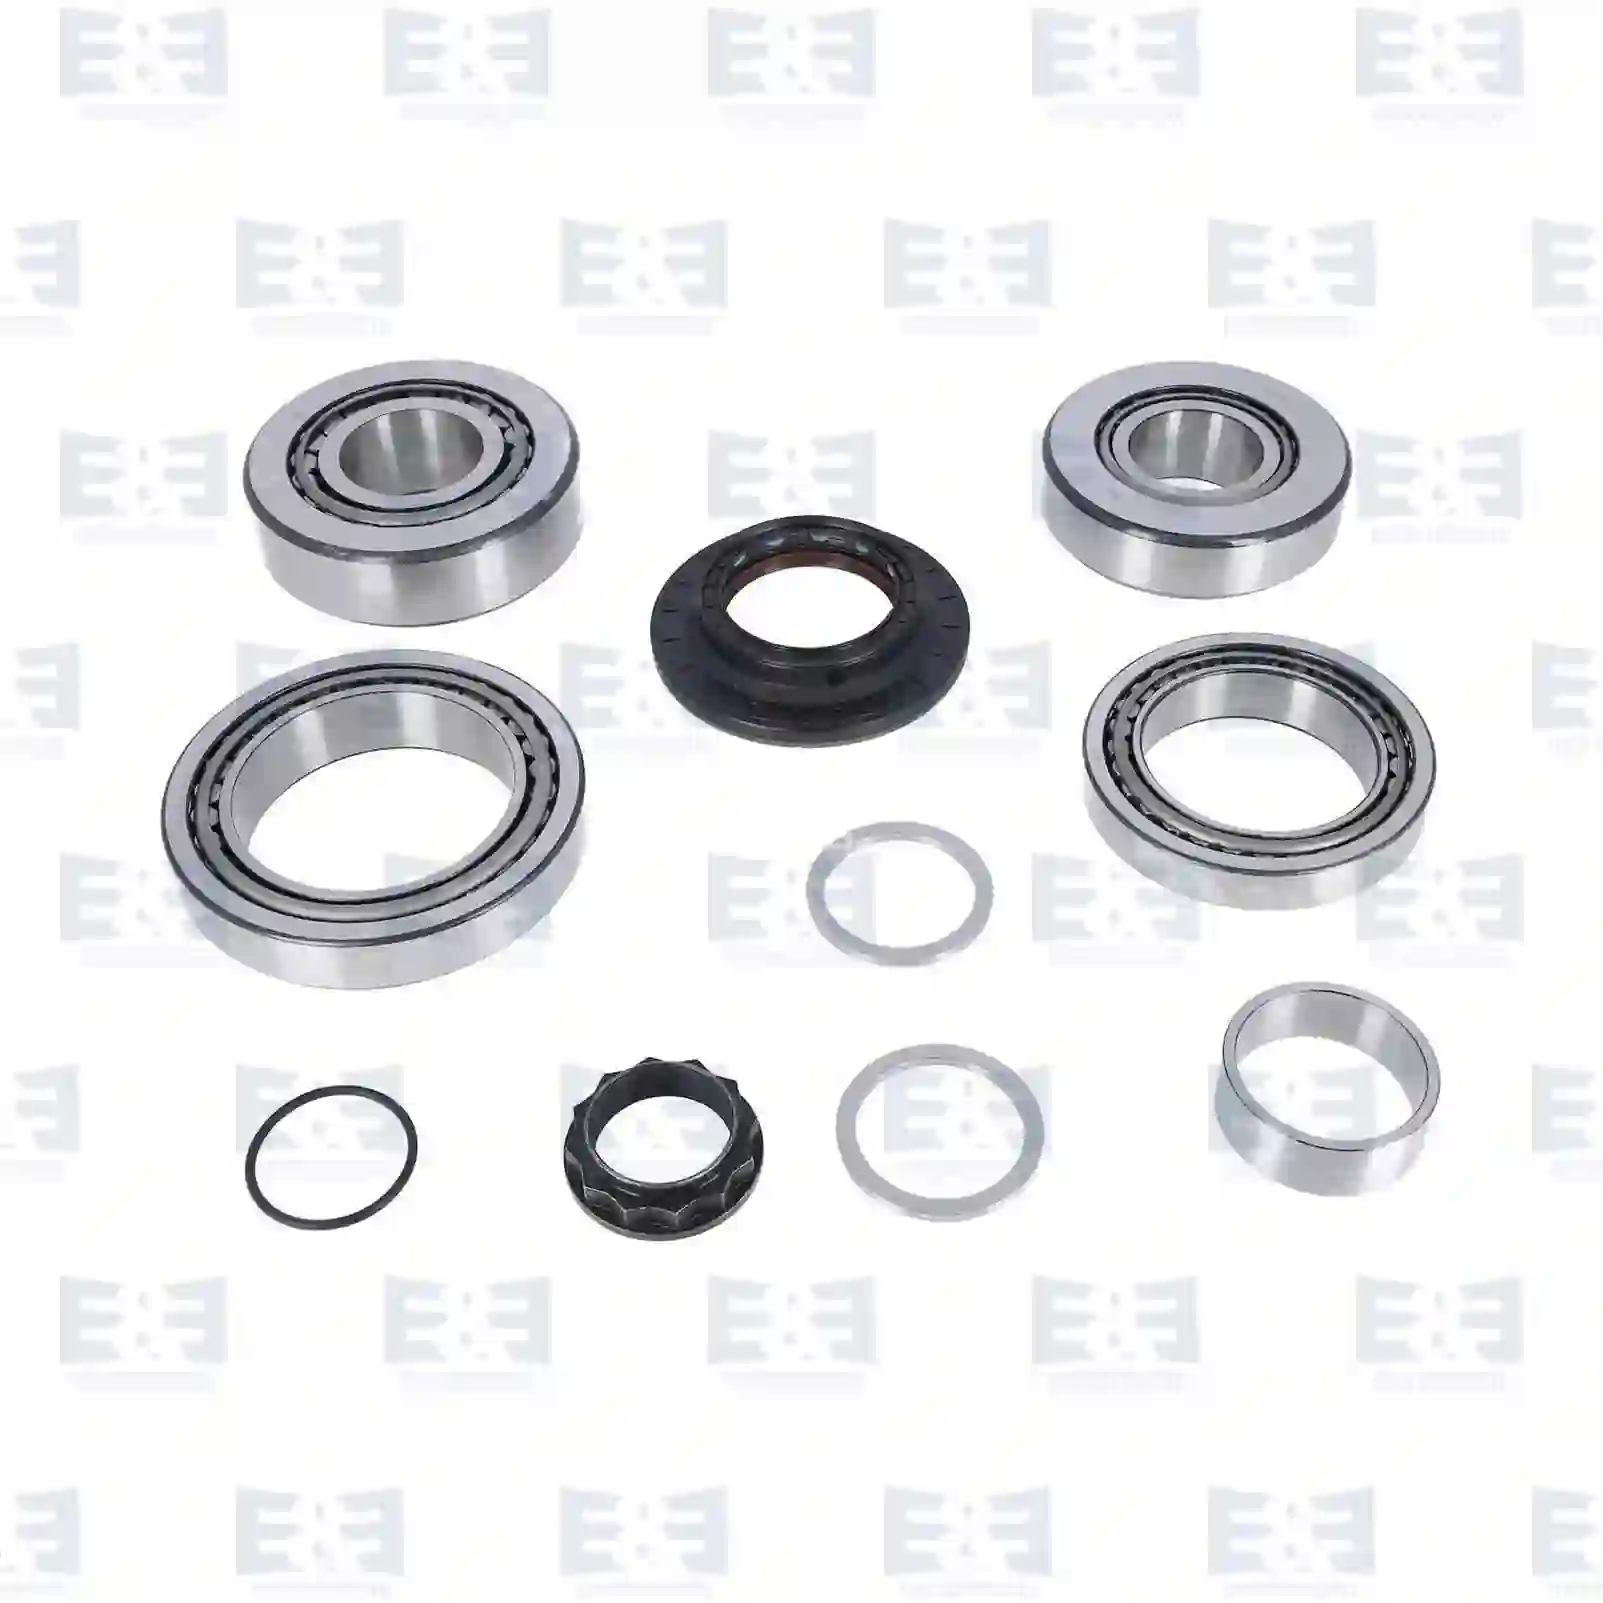 Bearing kit, with seal ring, differential, 2E2279081, 0019816405S1, 0019817205S1, 0029814605S1, 0049817405S1, 0069810405S1, 0069815505S1, 0149812005S1, 0149812105S1, 0149814405S1, 0149814905S1, 0149815005S1, 0149815405S1, 0149815005, 0179817905S1, 0219978547S1, 0239977947S1 ||  2E2279081 E&E Truck Spare Parts | Truck Spare Parts, Auotomotive Spare Parts Bearing kit, with seal ring, differential, 2E2279081, 0019816405S1, 0019817205S1, 0029814605S1, 0049817405S1, 0069810405S1, 0069815505S1, 0149812005S1, 0149812105S1, 0149814405S1, 0149814905S1, 0149815005S1, 0149815405S1, 0149815005, 0179817905S1, 0219978547S1, 0239977947S1 ||  2E2279081 E&E Truck Spare Parts | Truck Spare Parts, Auotomotive Spare Parts